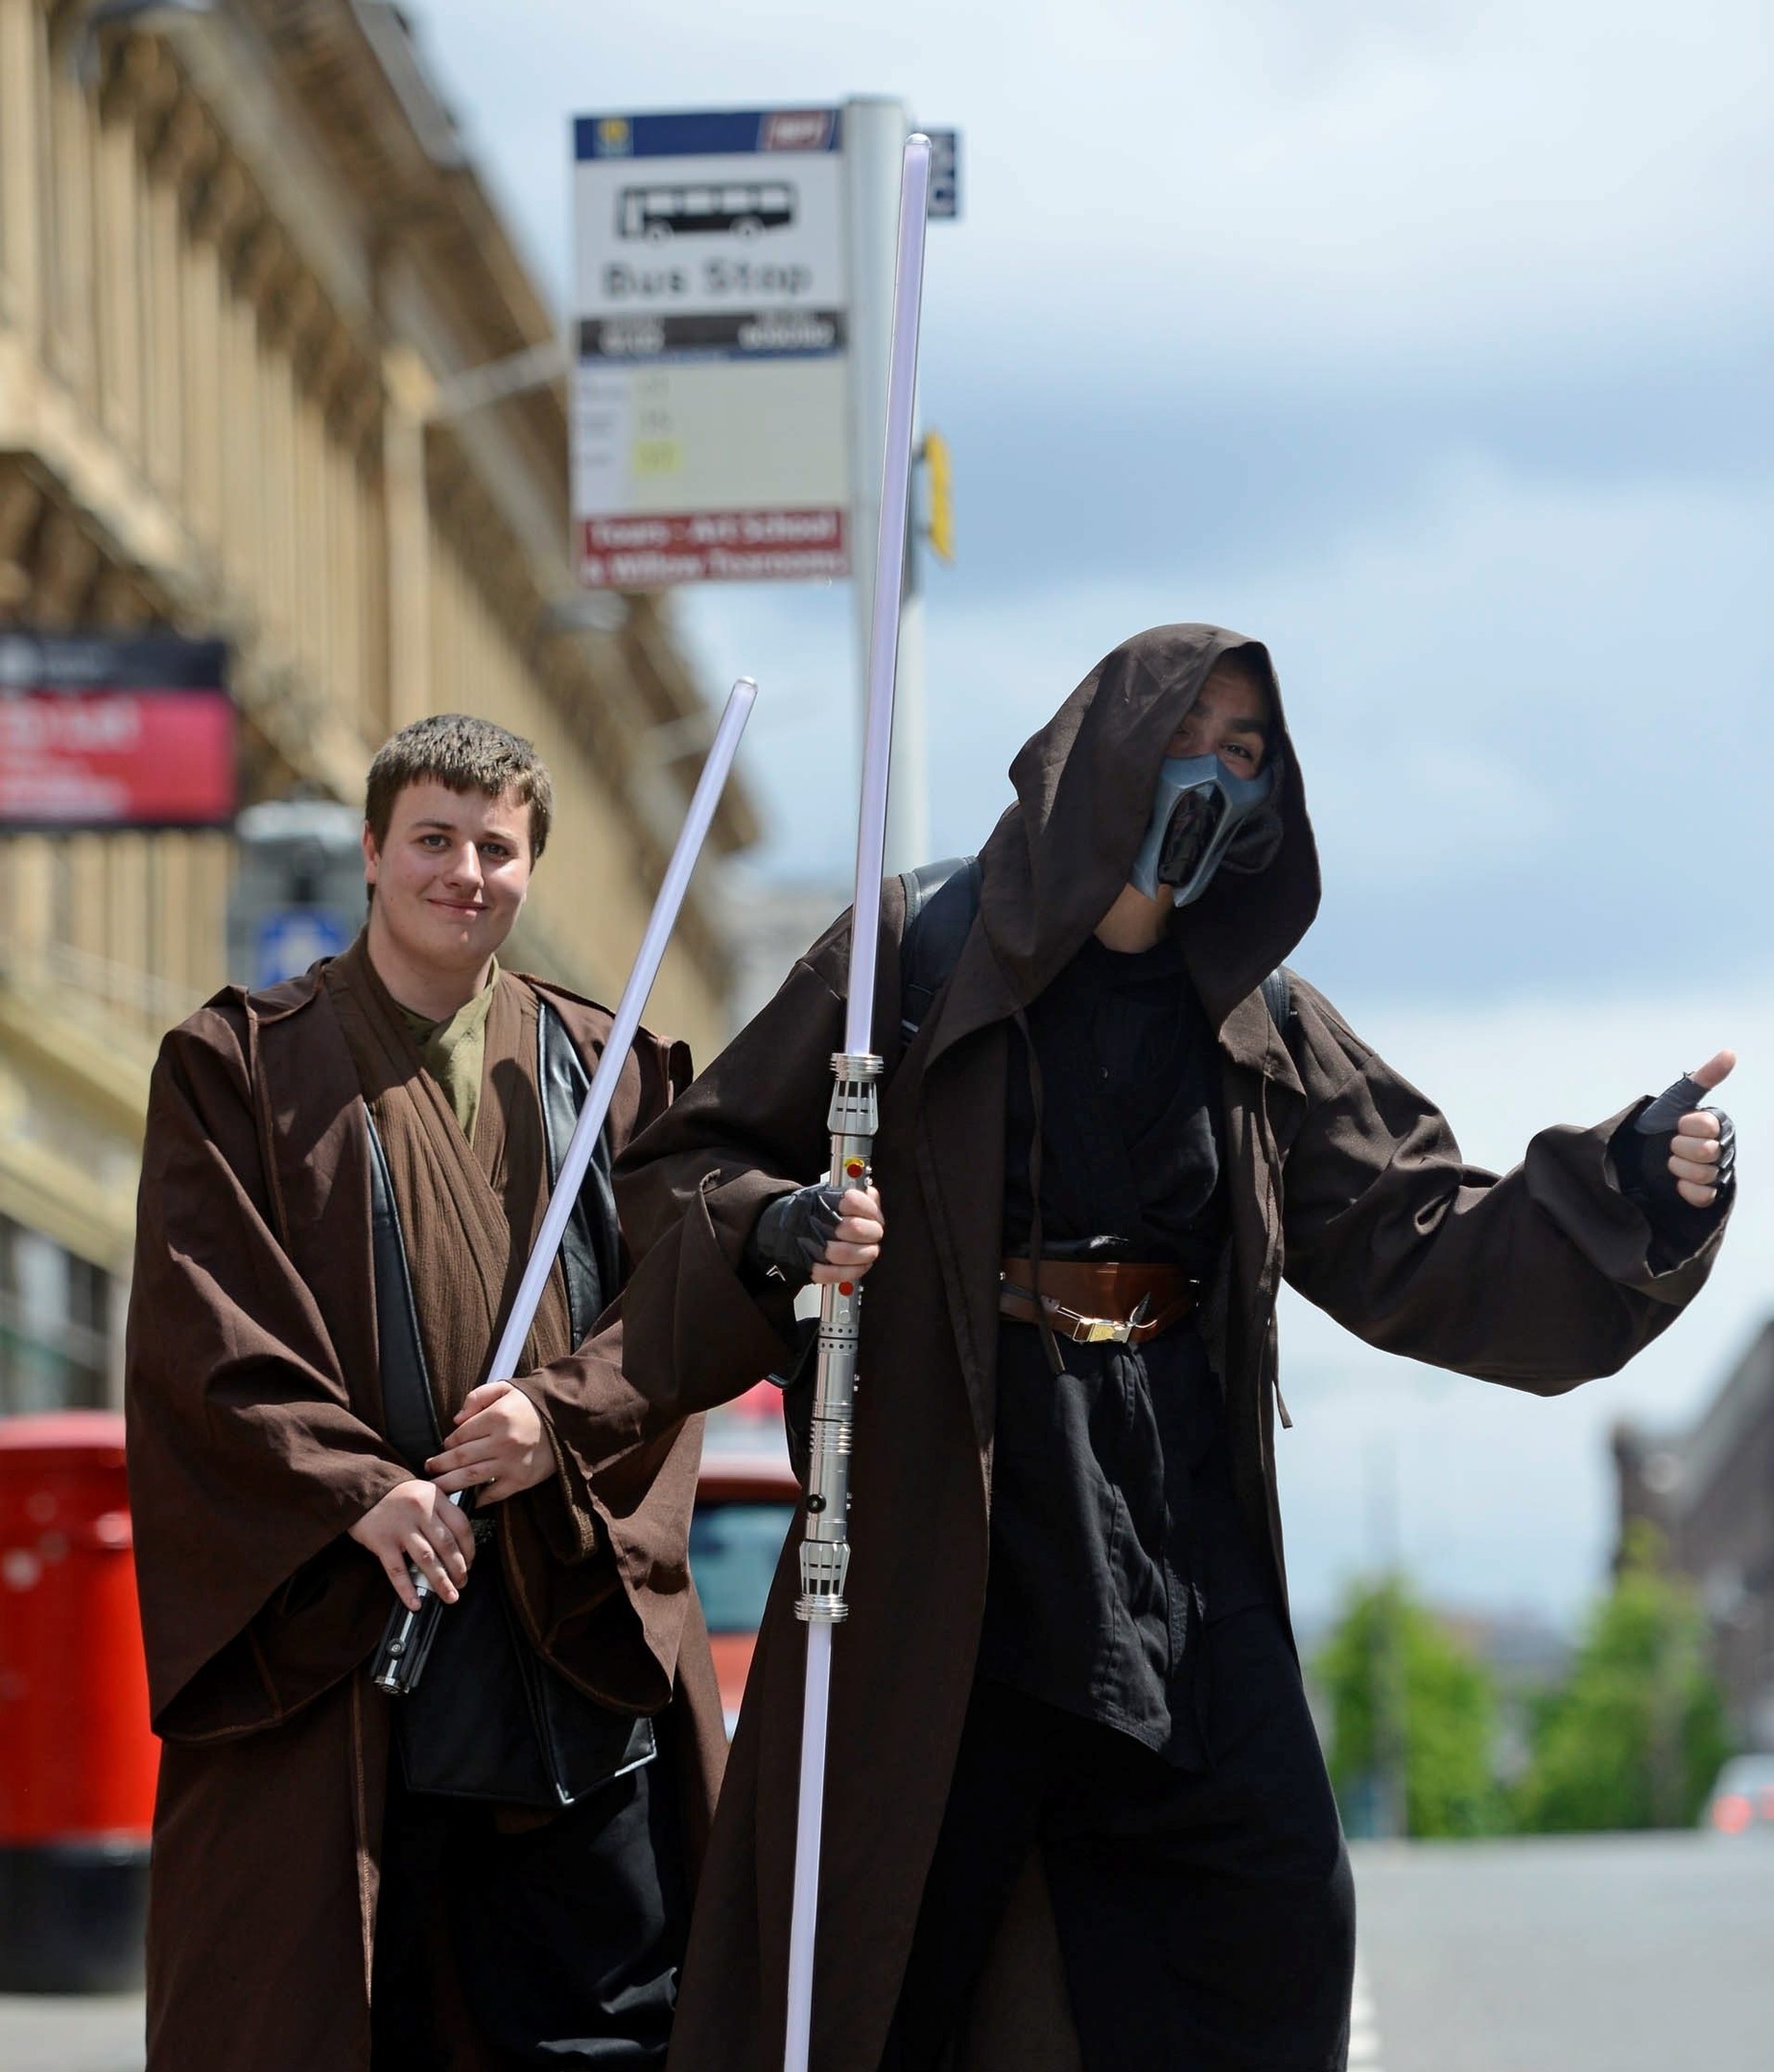 Two Jedi wait for a bus in Scotland